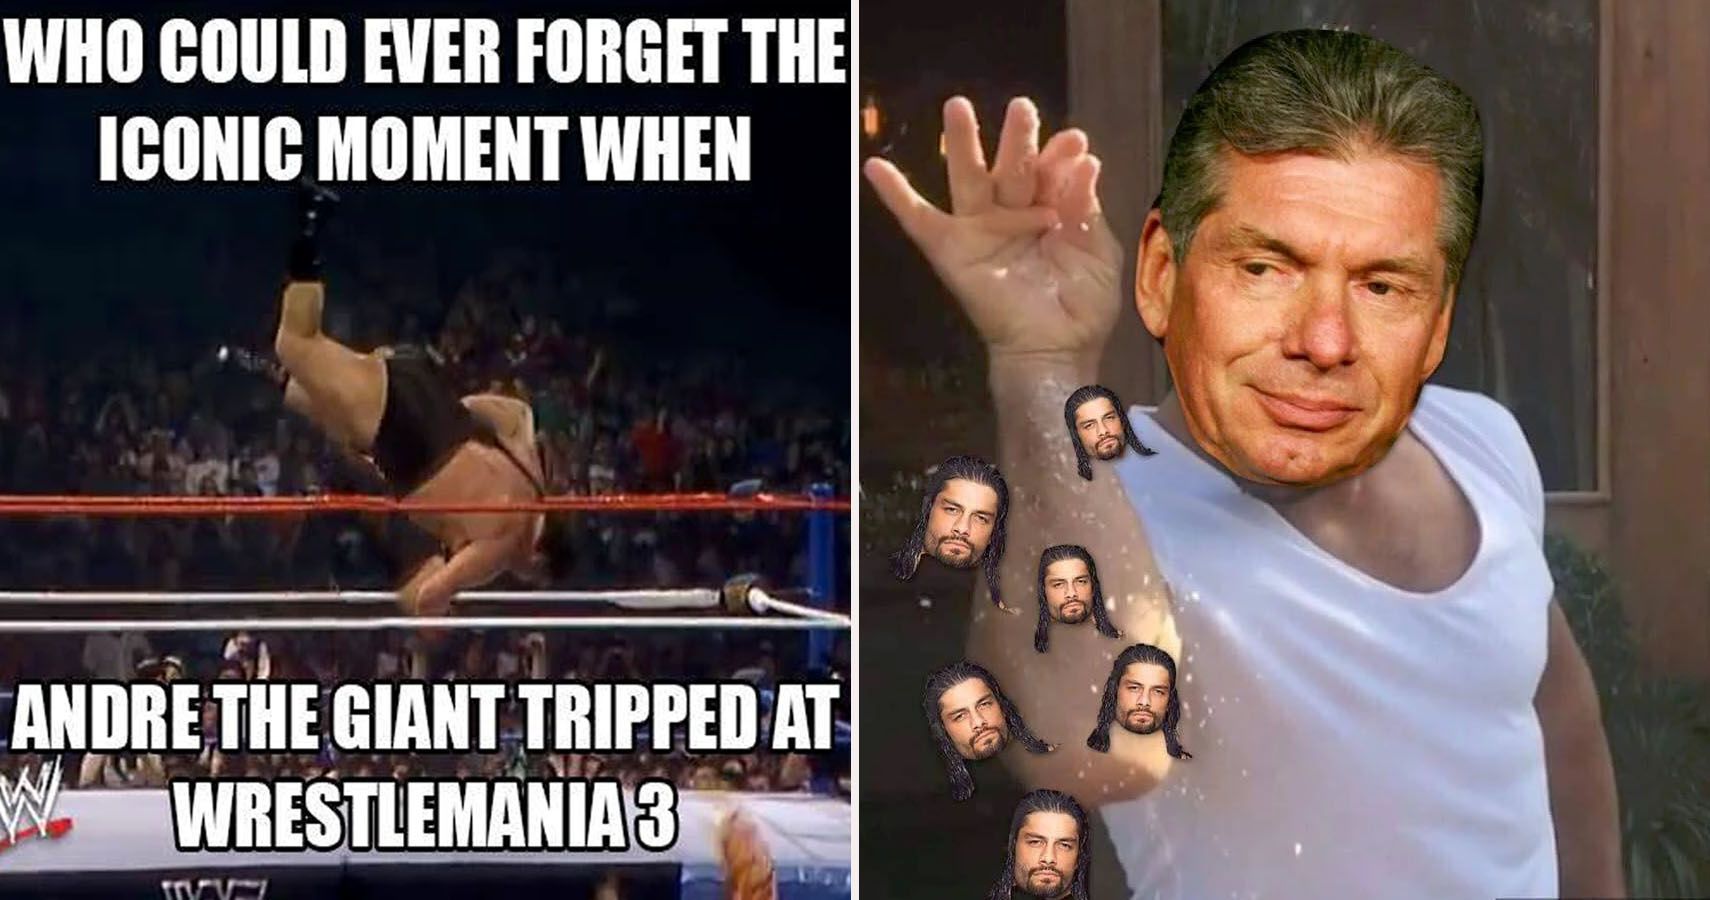 15 Wwe Memes That Will Make You Cry With Laughter Thesportster.